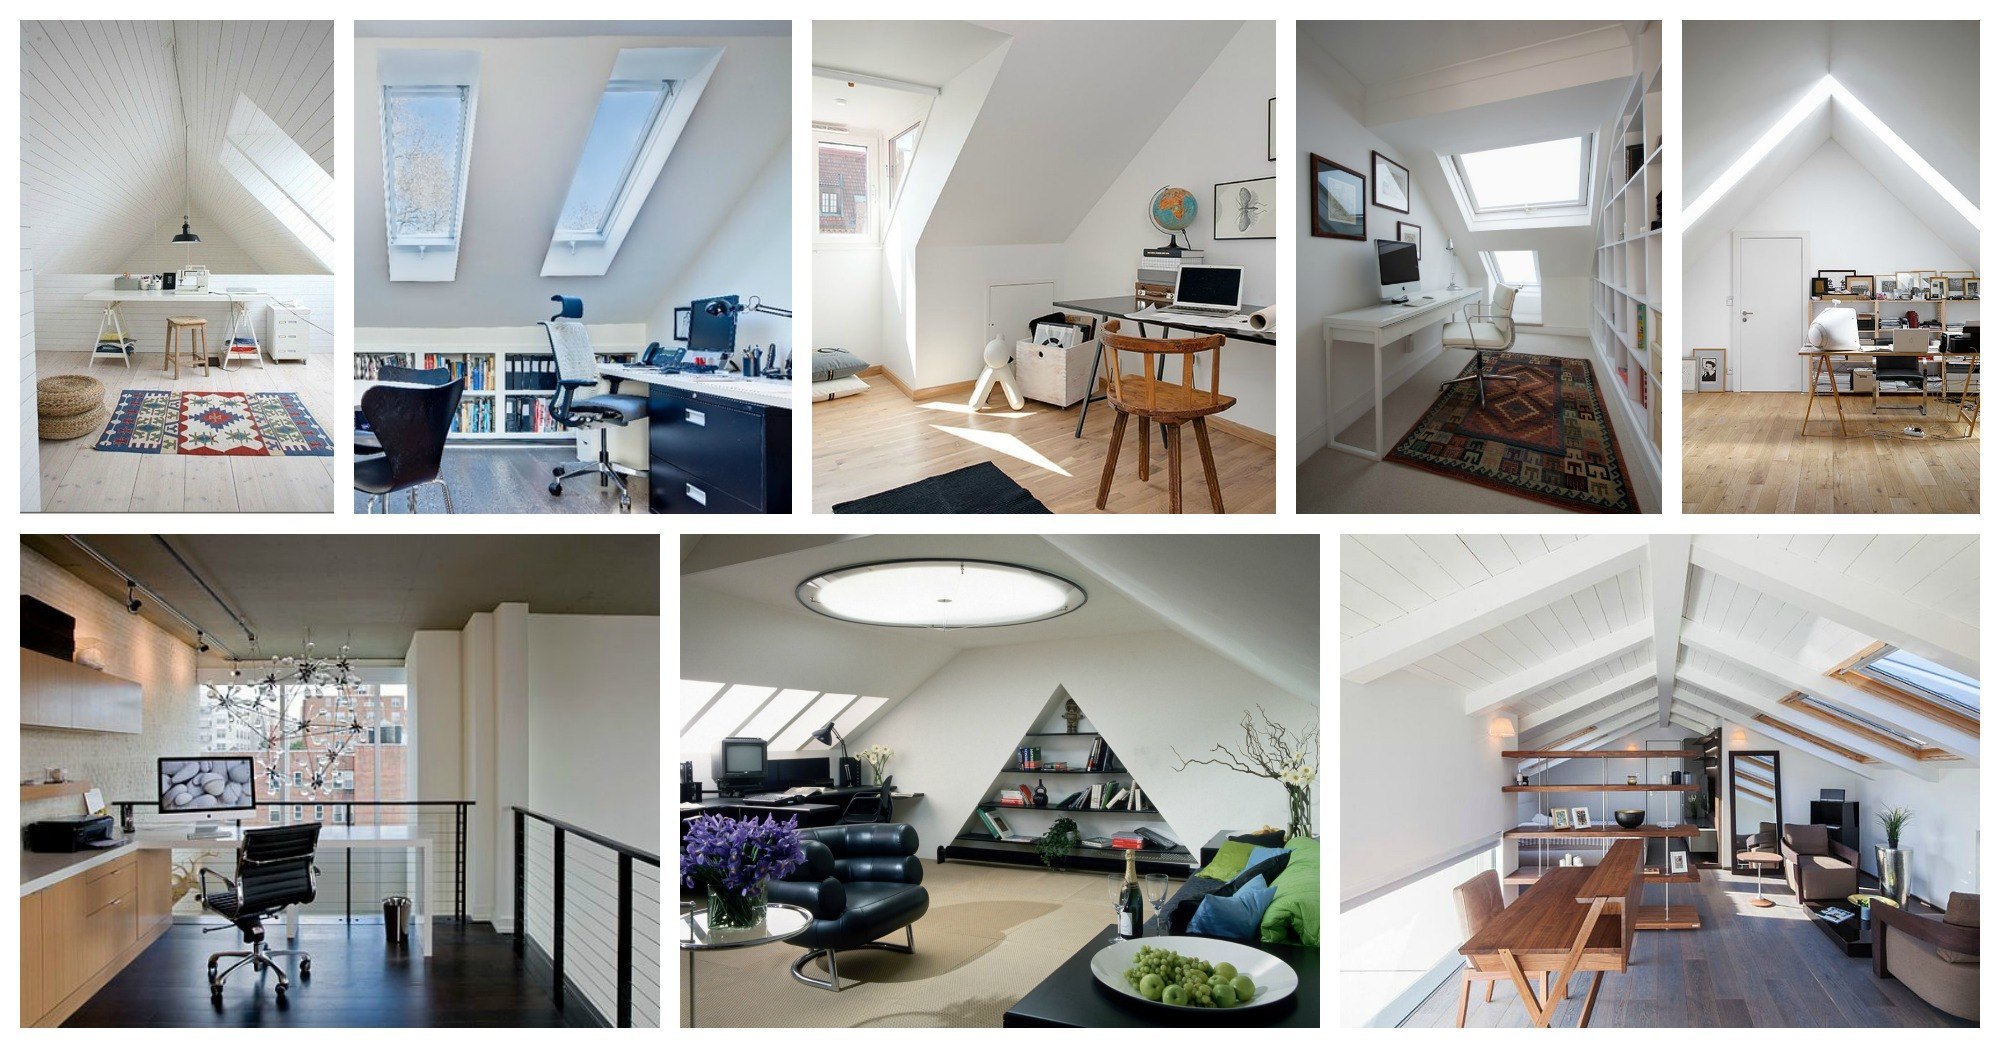 Office Attic Attic Office Inspiration 30 Hispotion / Many companies are now offering their